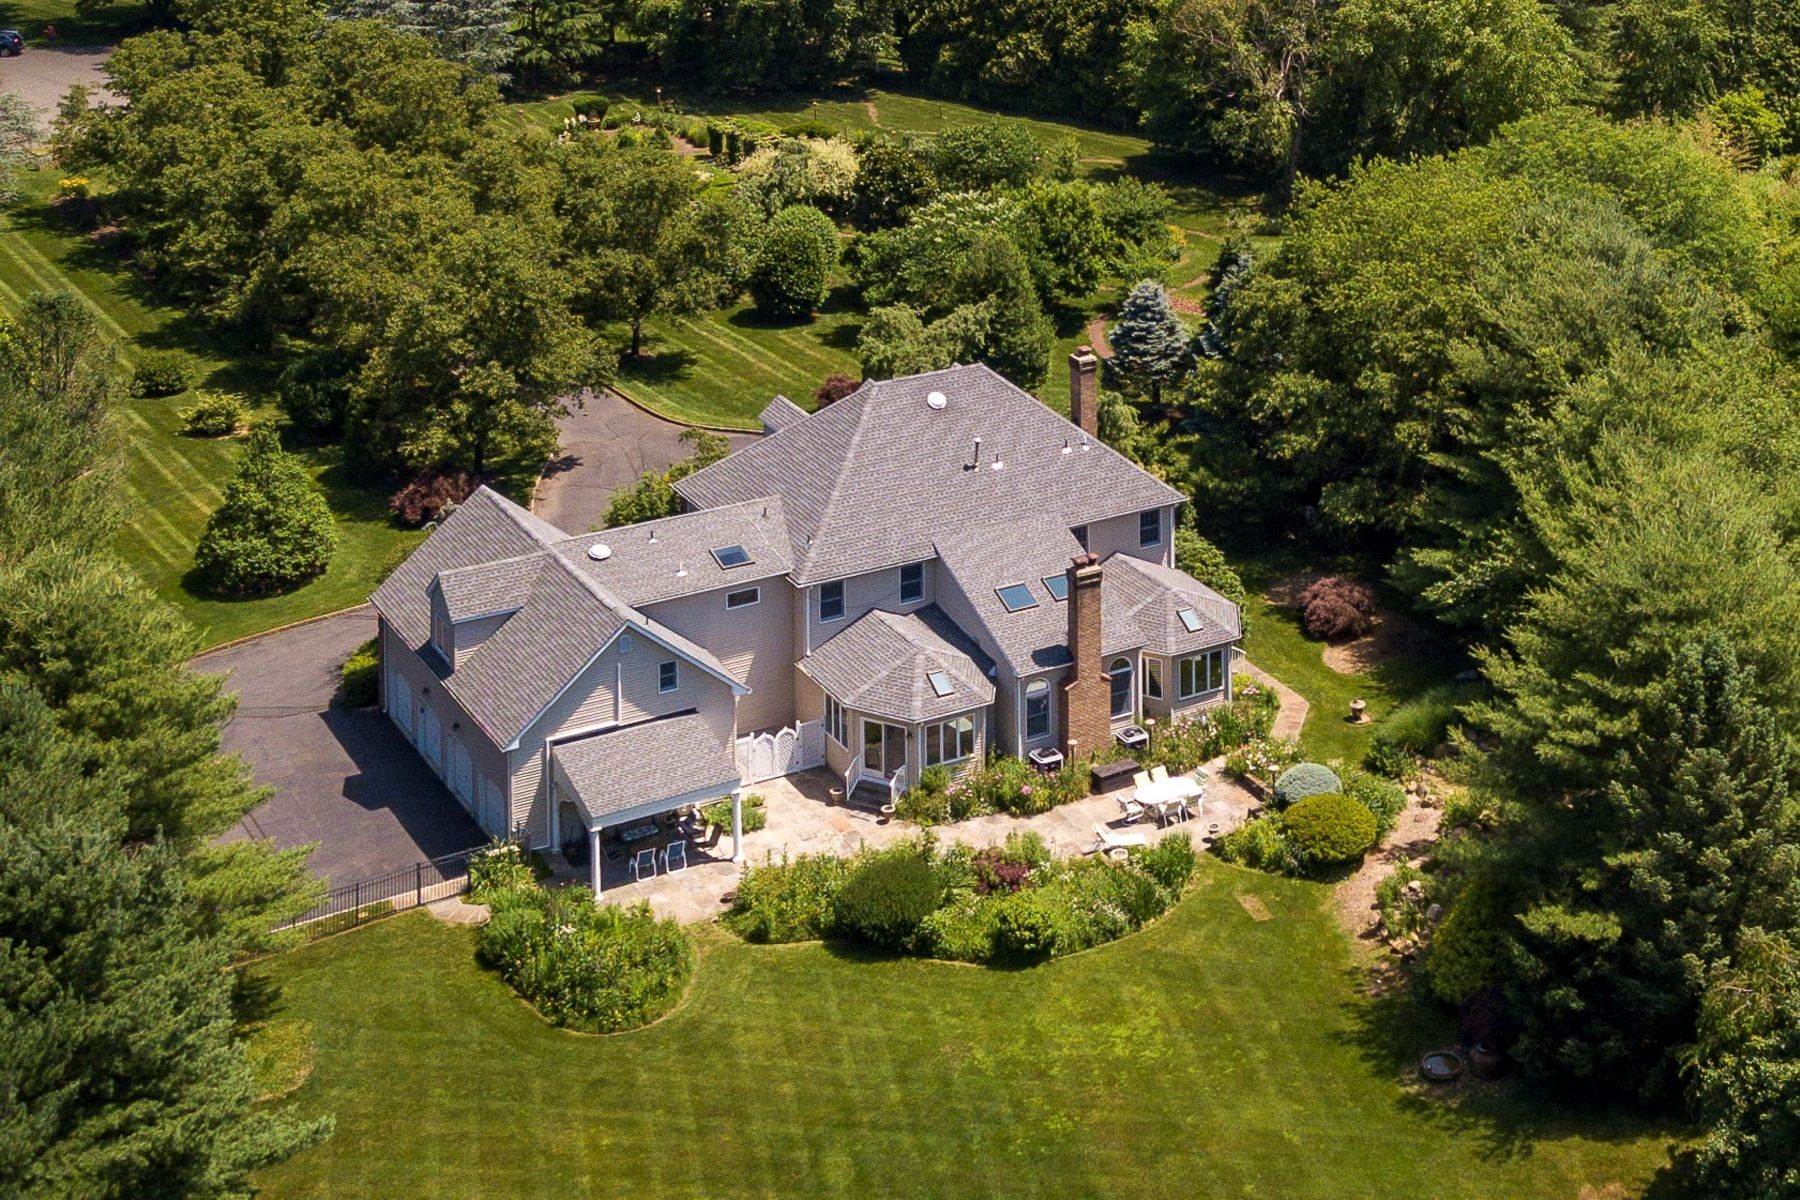 43. Single Family Homes for Sale at Sunlit Home Surrounded By Gardens and Orchards 5 Pollack Court, Cranbury, New Jersey 08512 United States